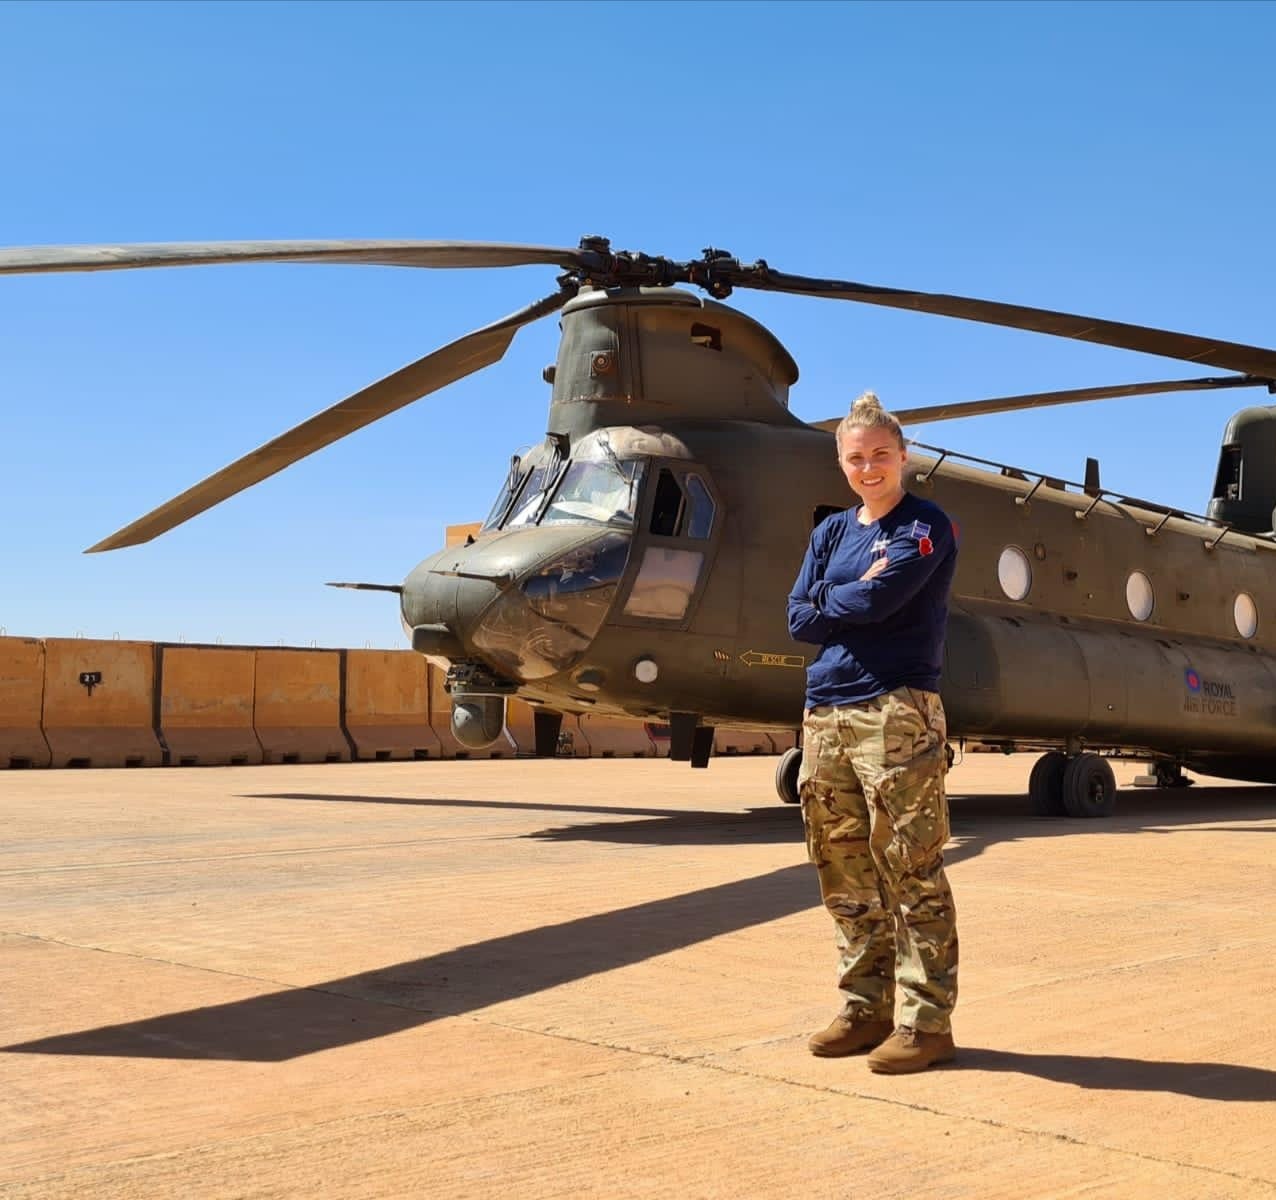 SAC Katie Vickers, from RAF Benson, currently deployed with the Joint Helicopter Support Squadron on Op NEWCOMBE in Mali.